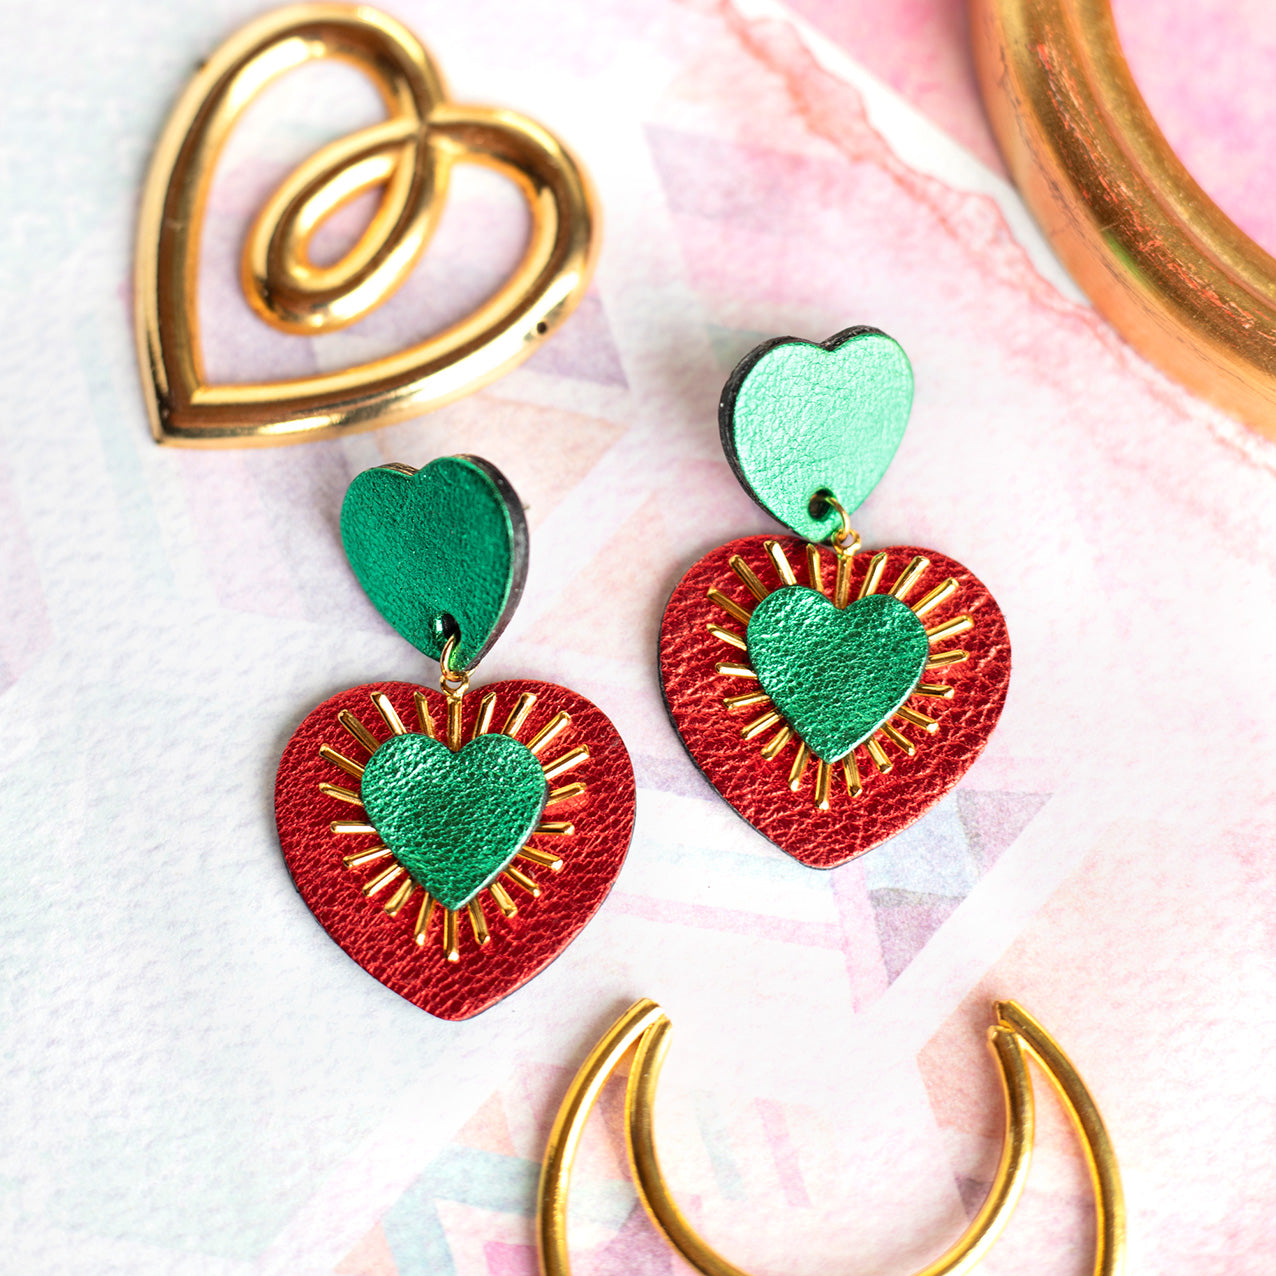 Sacré Coeur earrings in metallic green and red leather